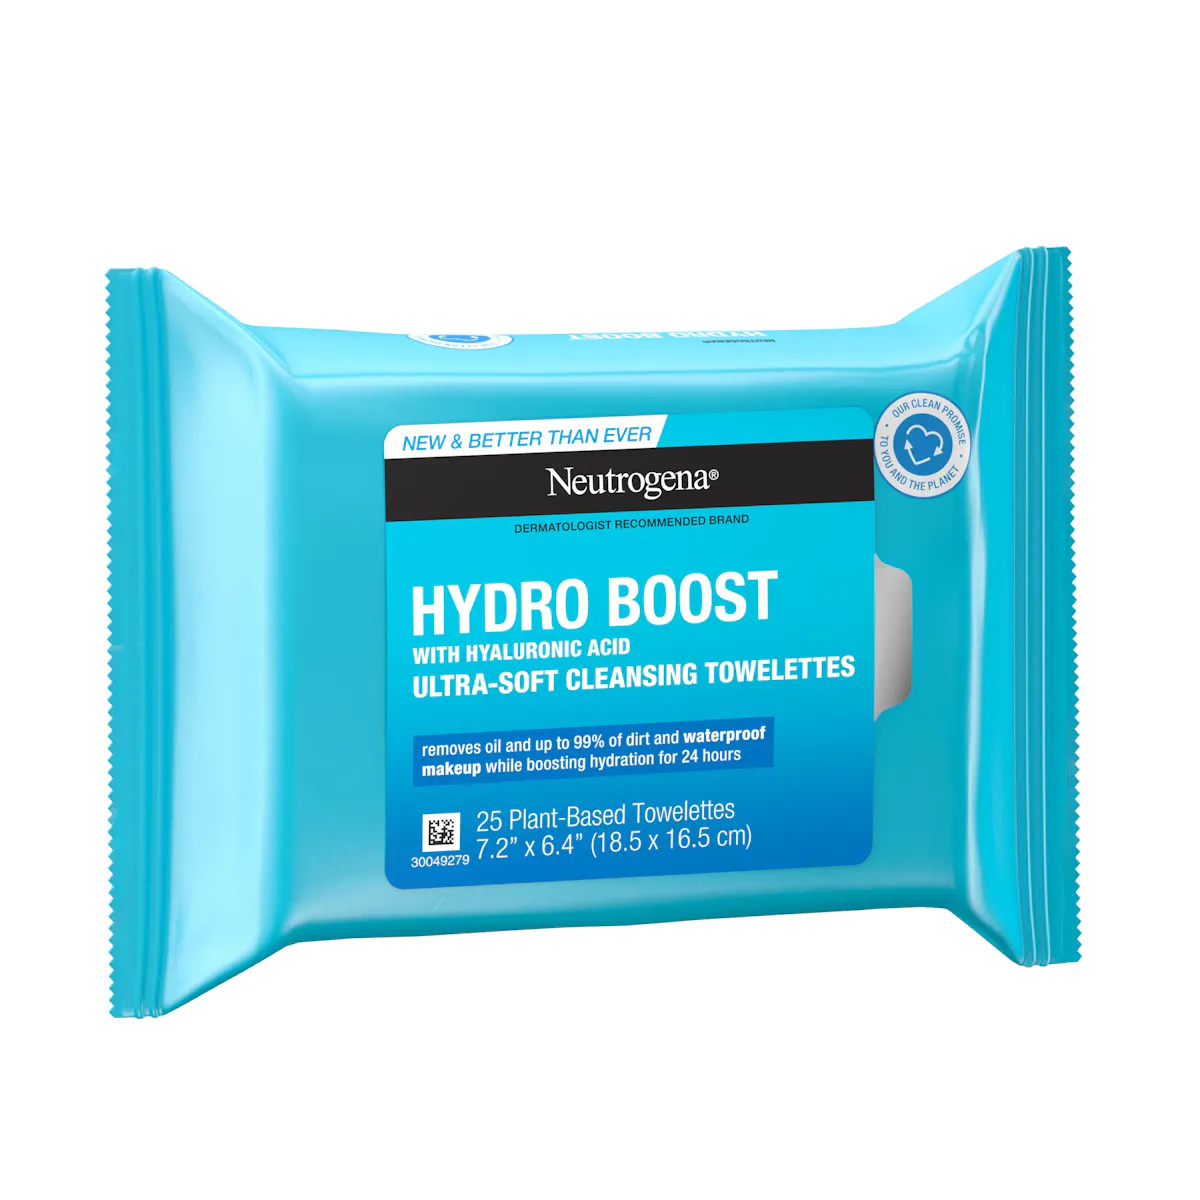 Hydro Boost Makeup Wipes with Hyaluronic Acid | Neutrogena®